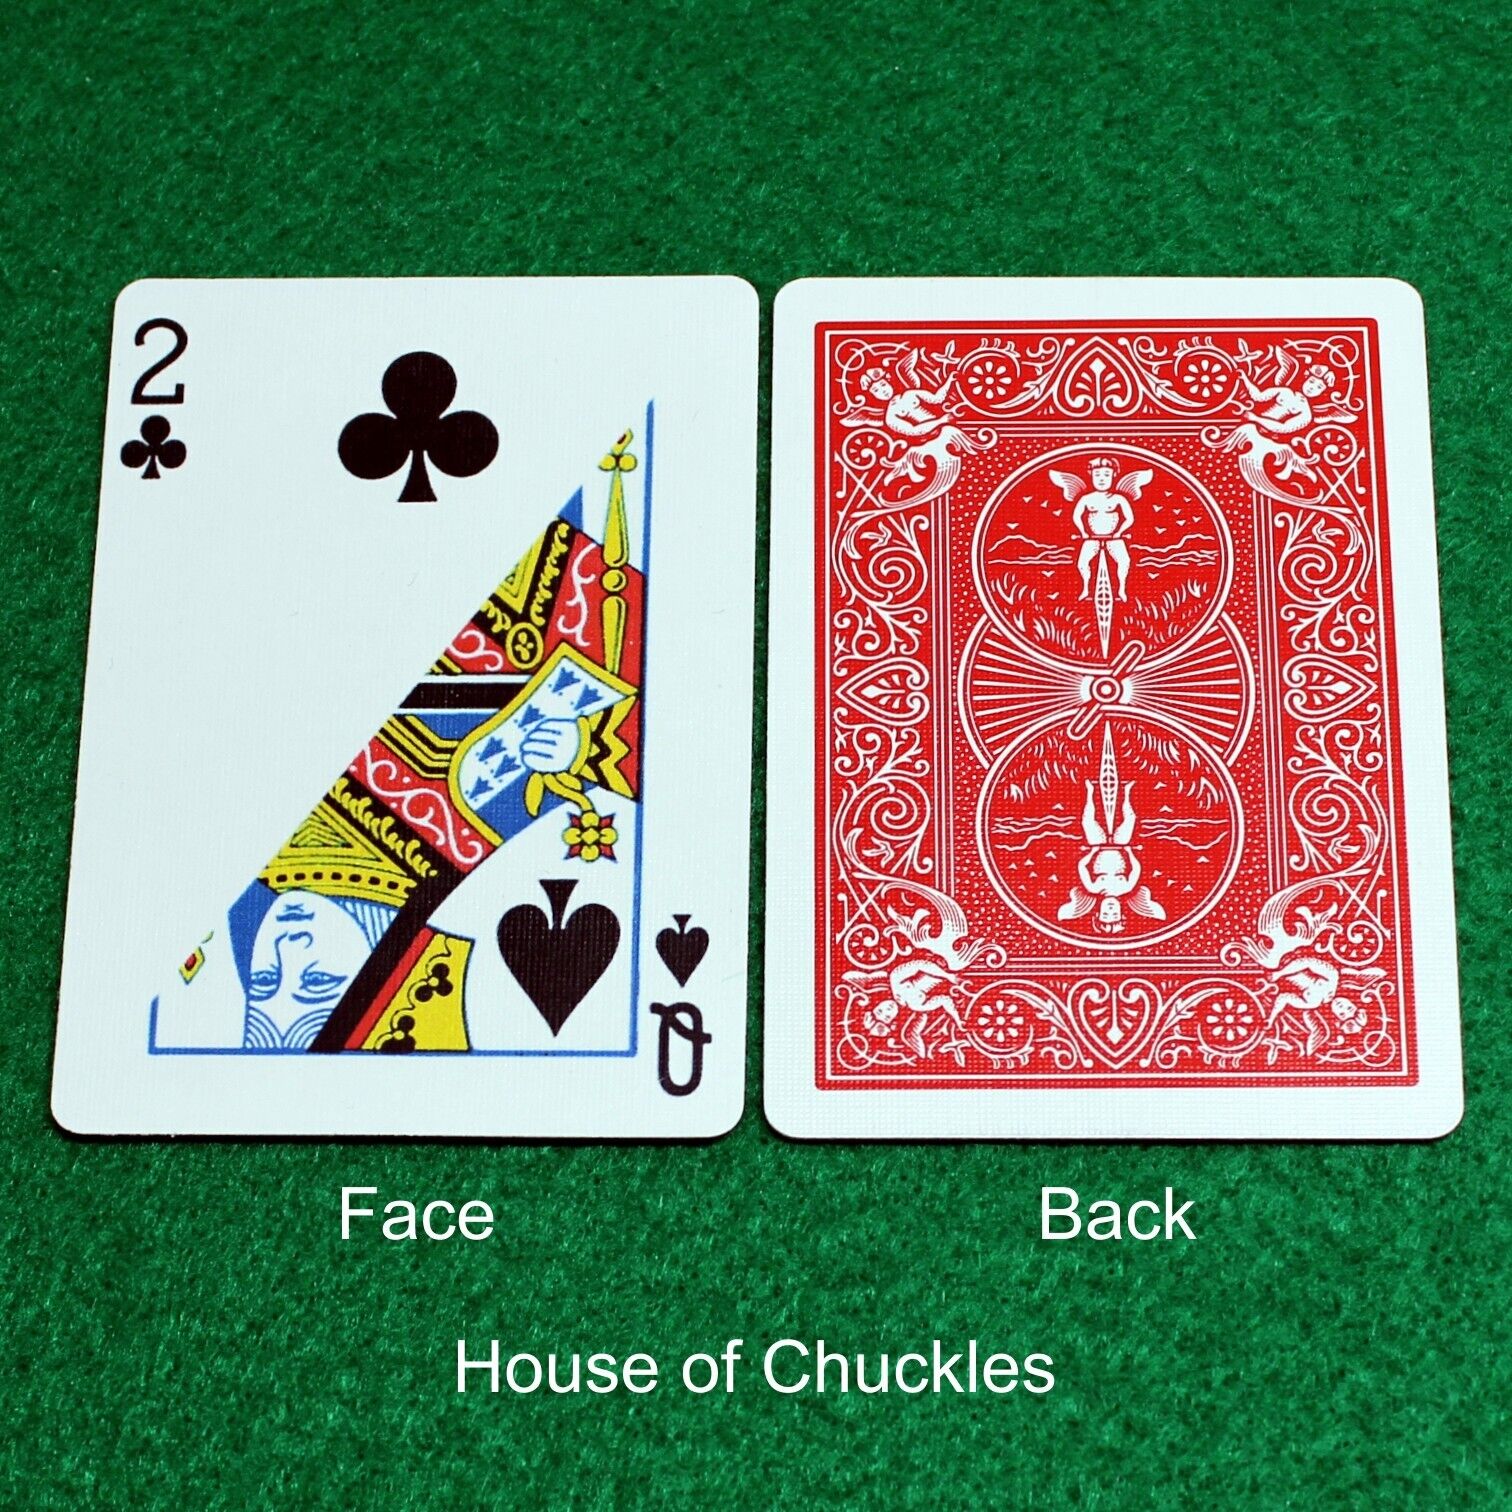 2 Club / Queen Spades, Half Diagonal, Red, Printed Bicycle Gaff Playing Card